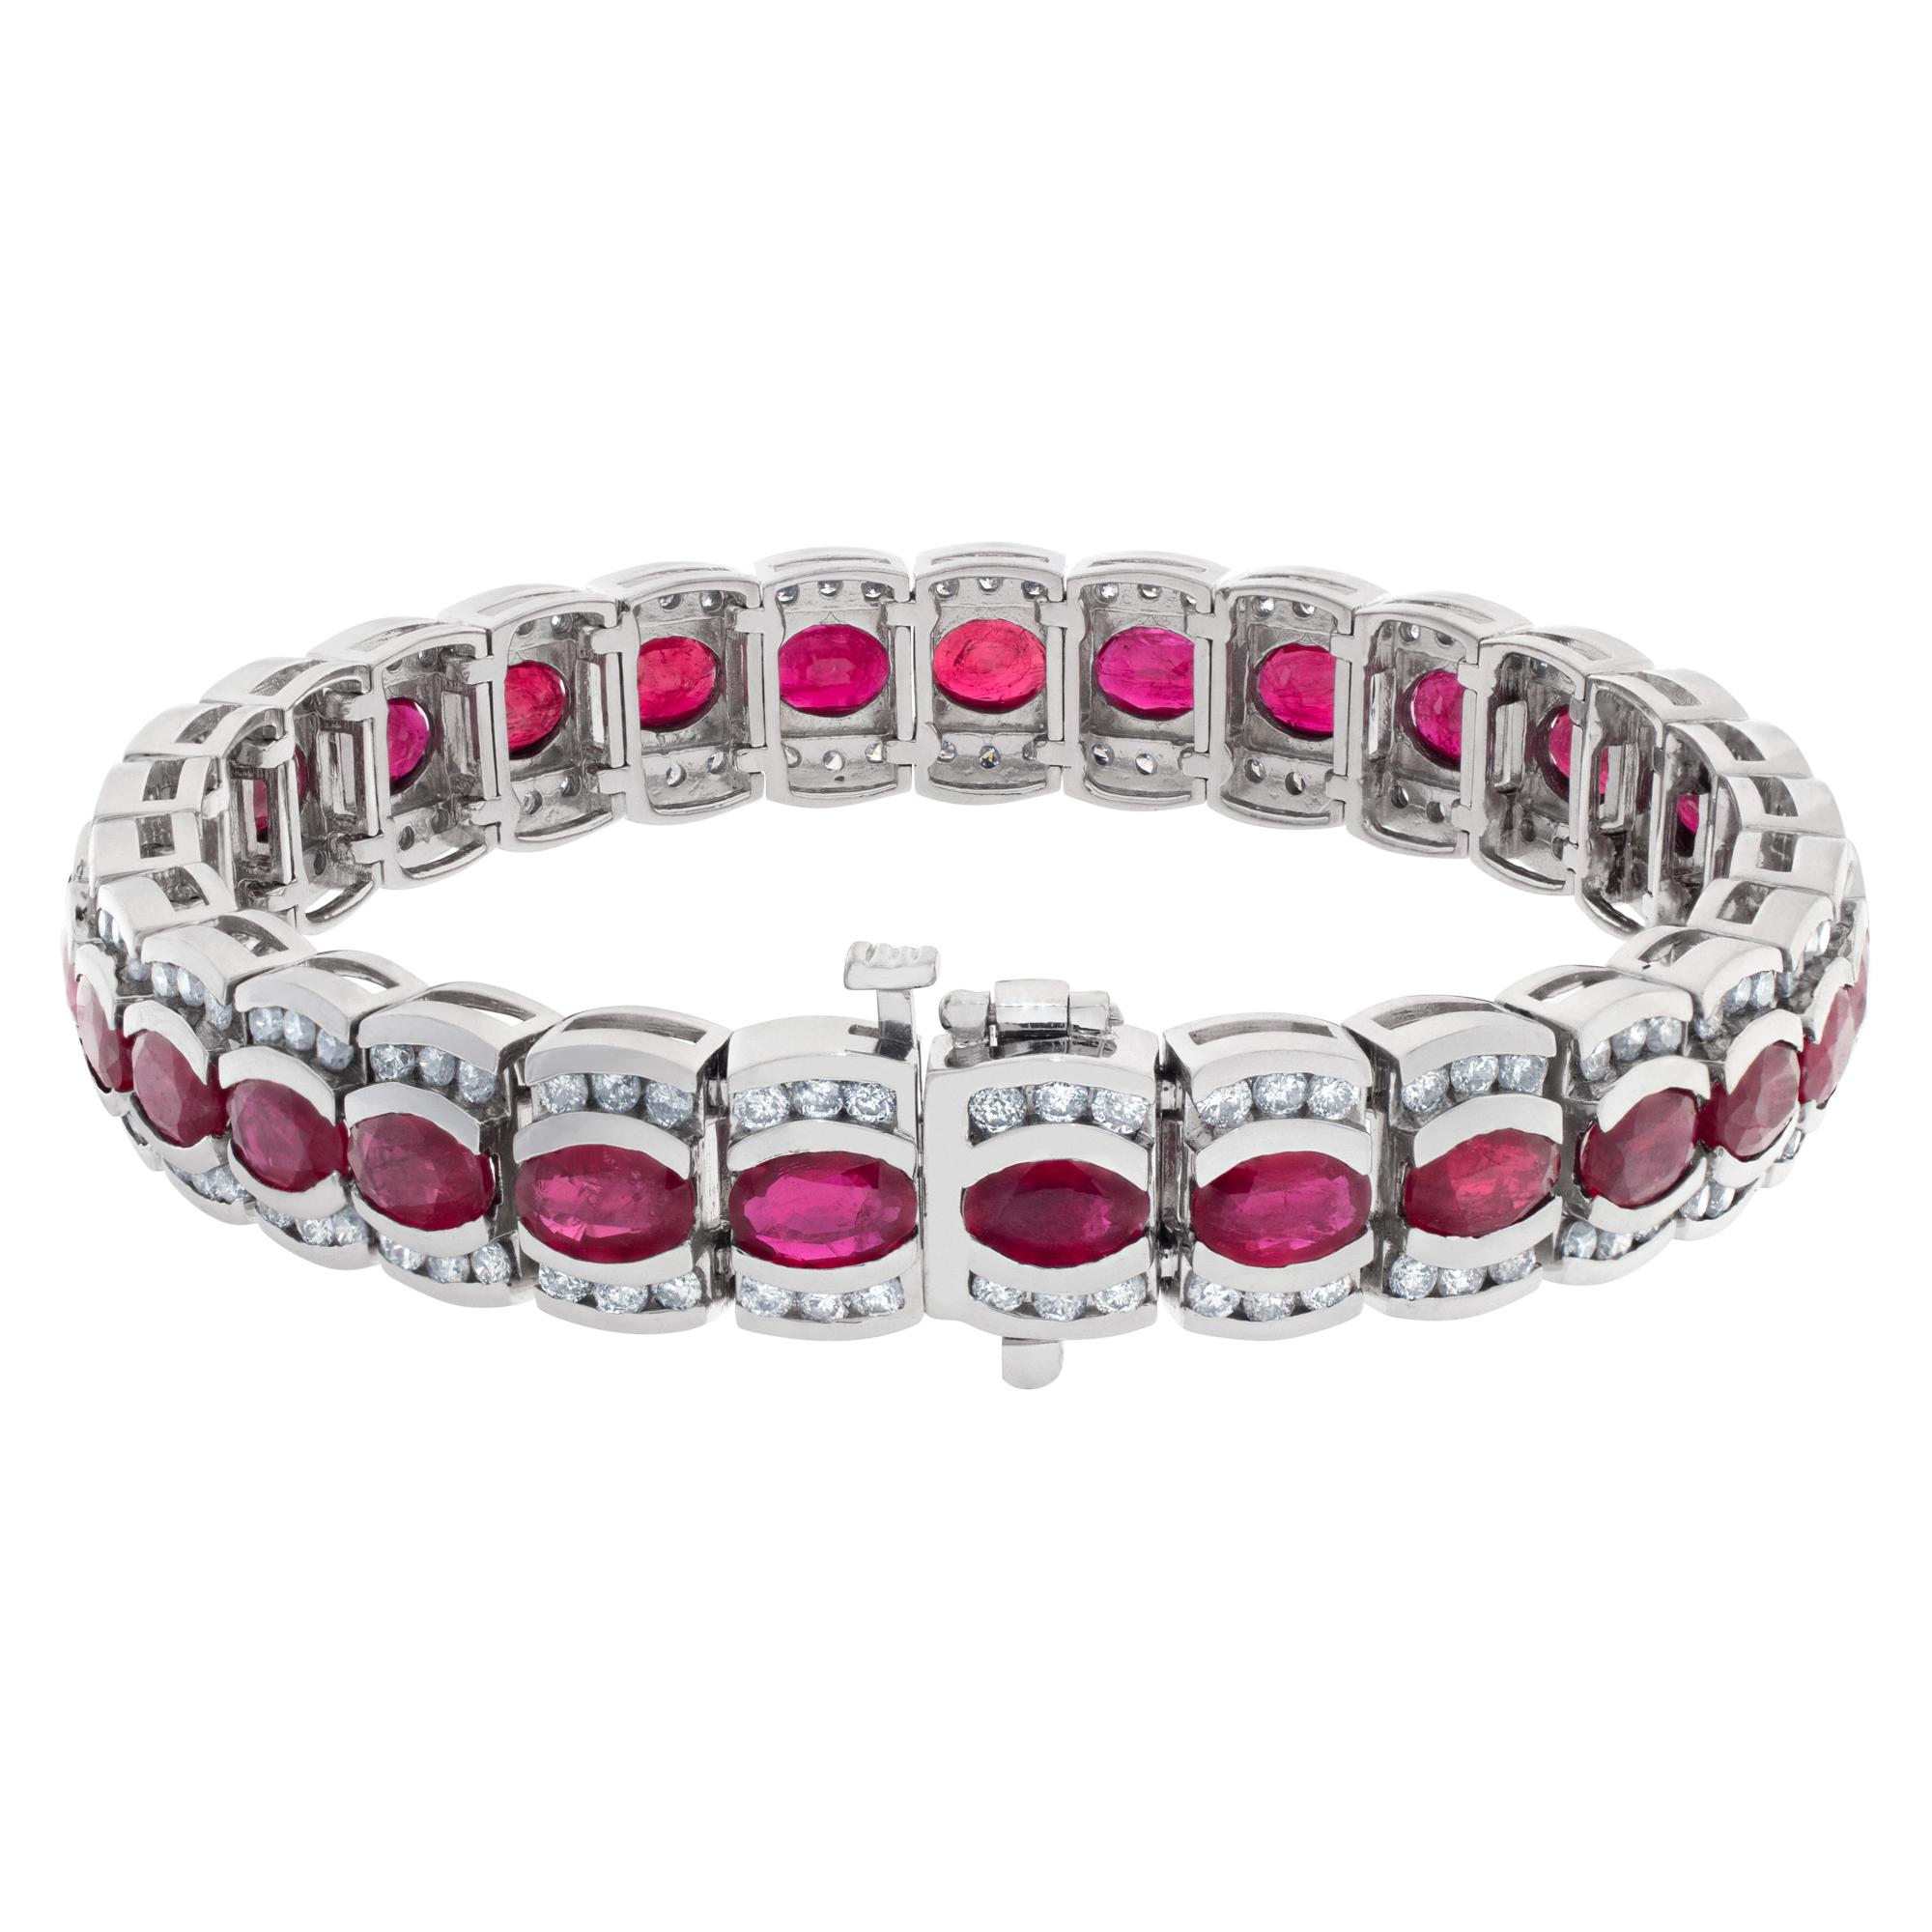 Line Bracelet in 14k White Gold with 4 Cts in Diamonds and 17.10 Cts in Rubies In Excellent Condition For Sale In Surfside, FL